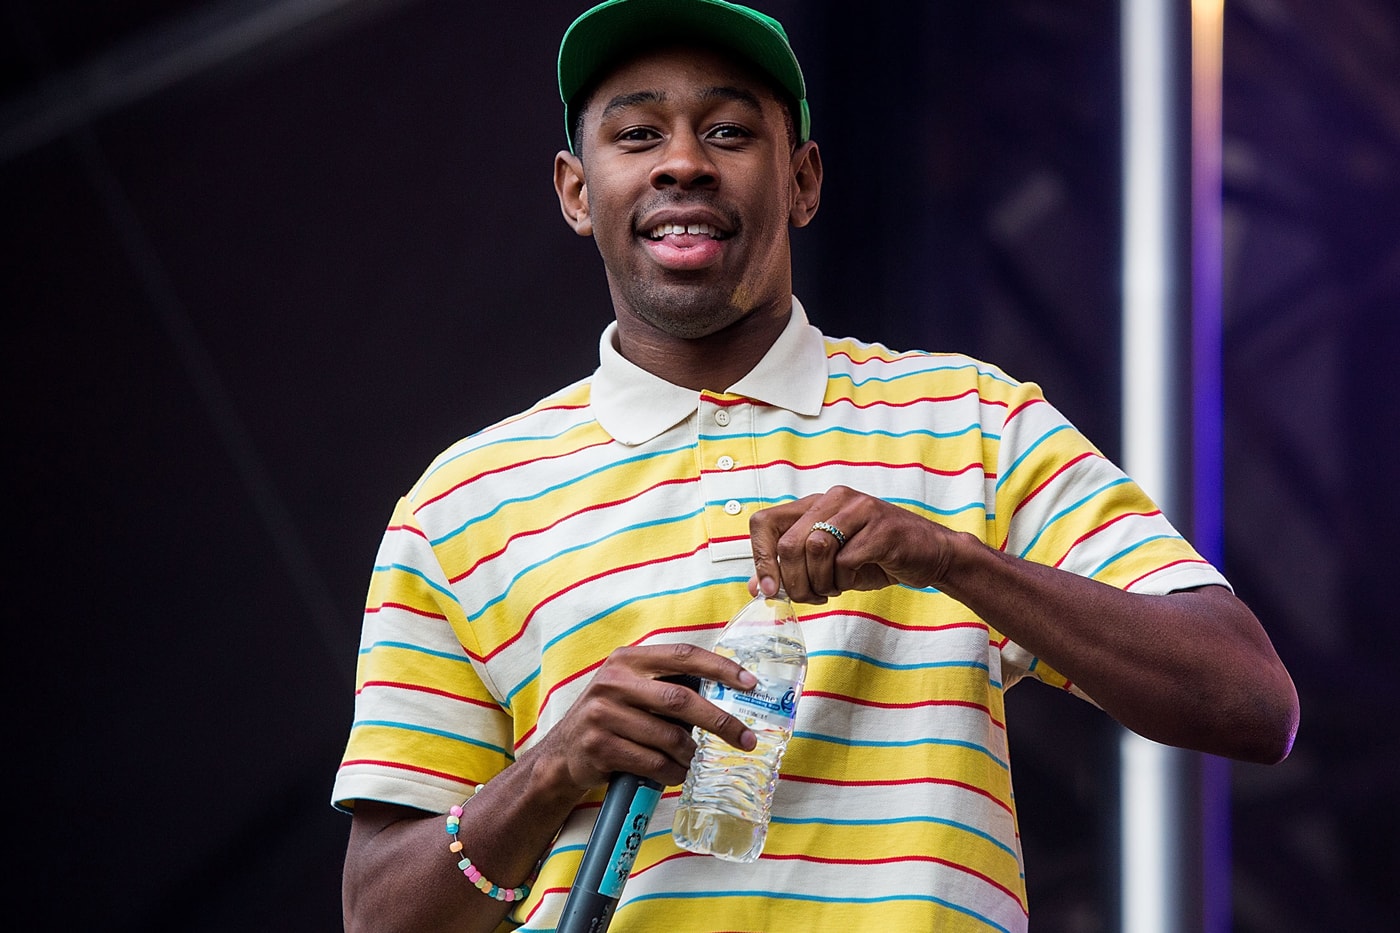 tyler-the-creator-viceland-tv-show